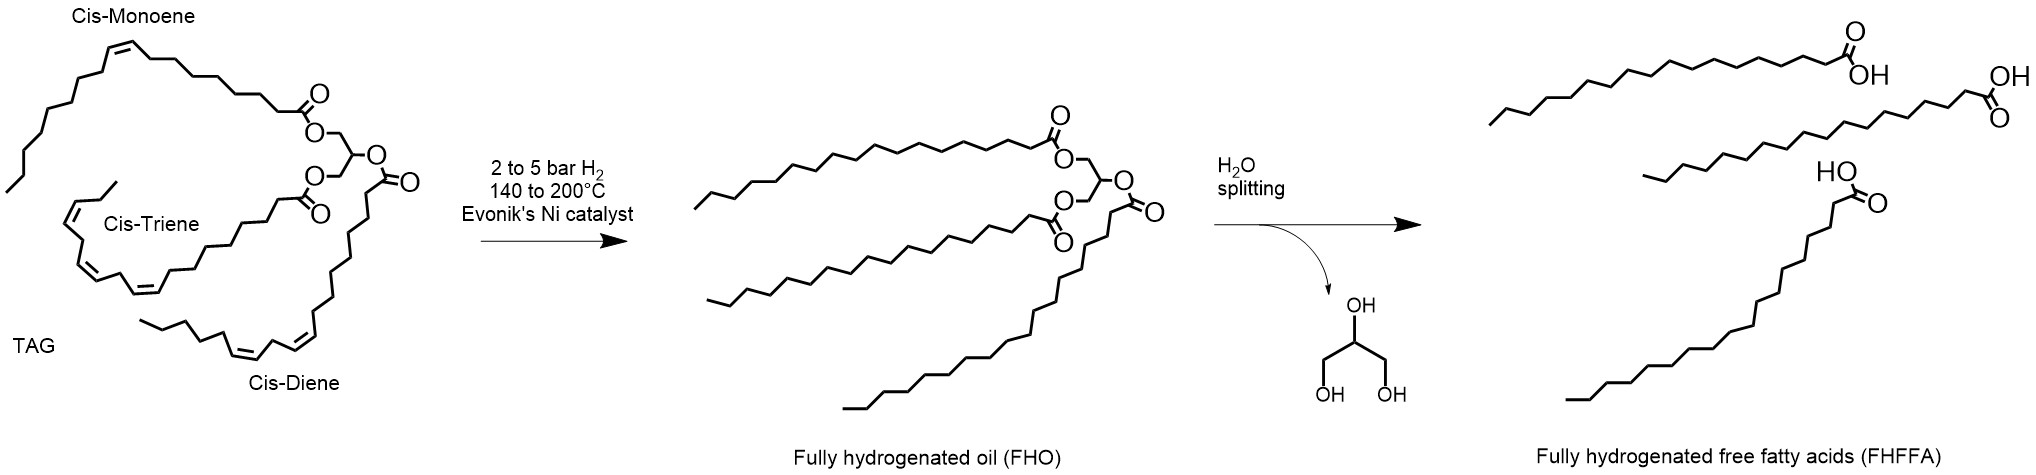 Figure 3.  The full hydrogenation of triglycerides followed by splitting for the manufacture of saturated free fatty acids.